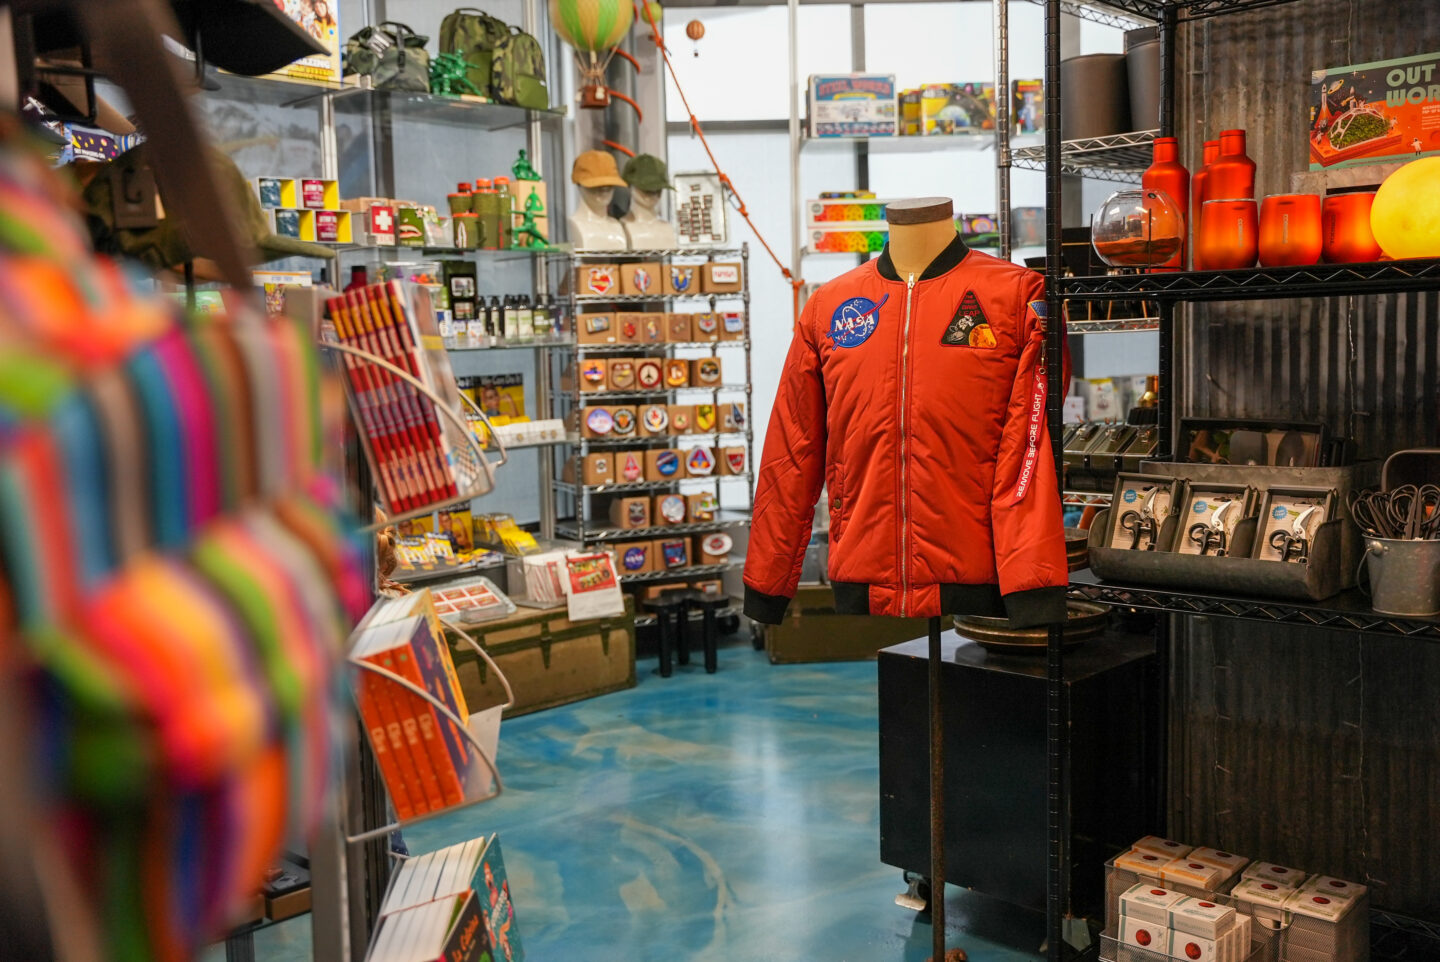 A bright orange bomber jacket with a NASA insignia is displayed on a headless mannequin next to a shelf full of mars related items.